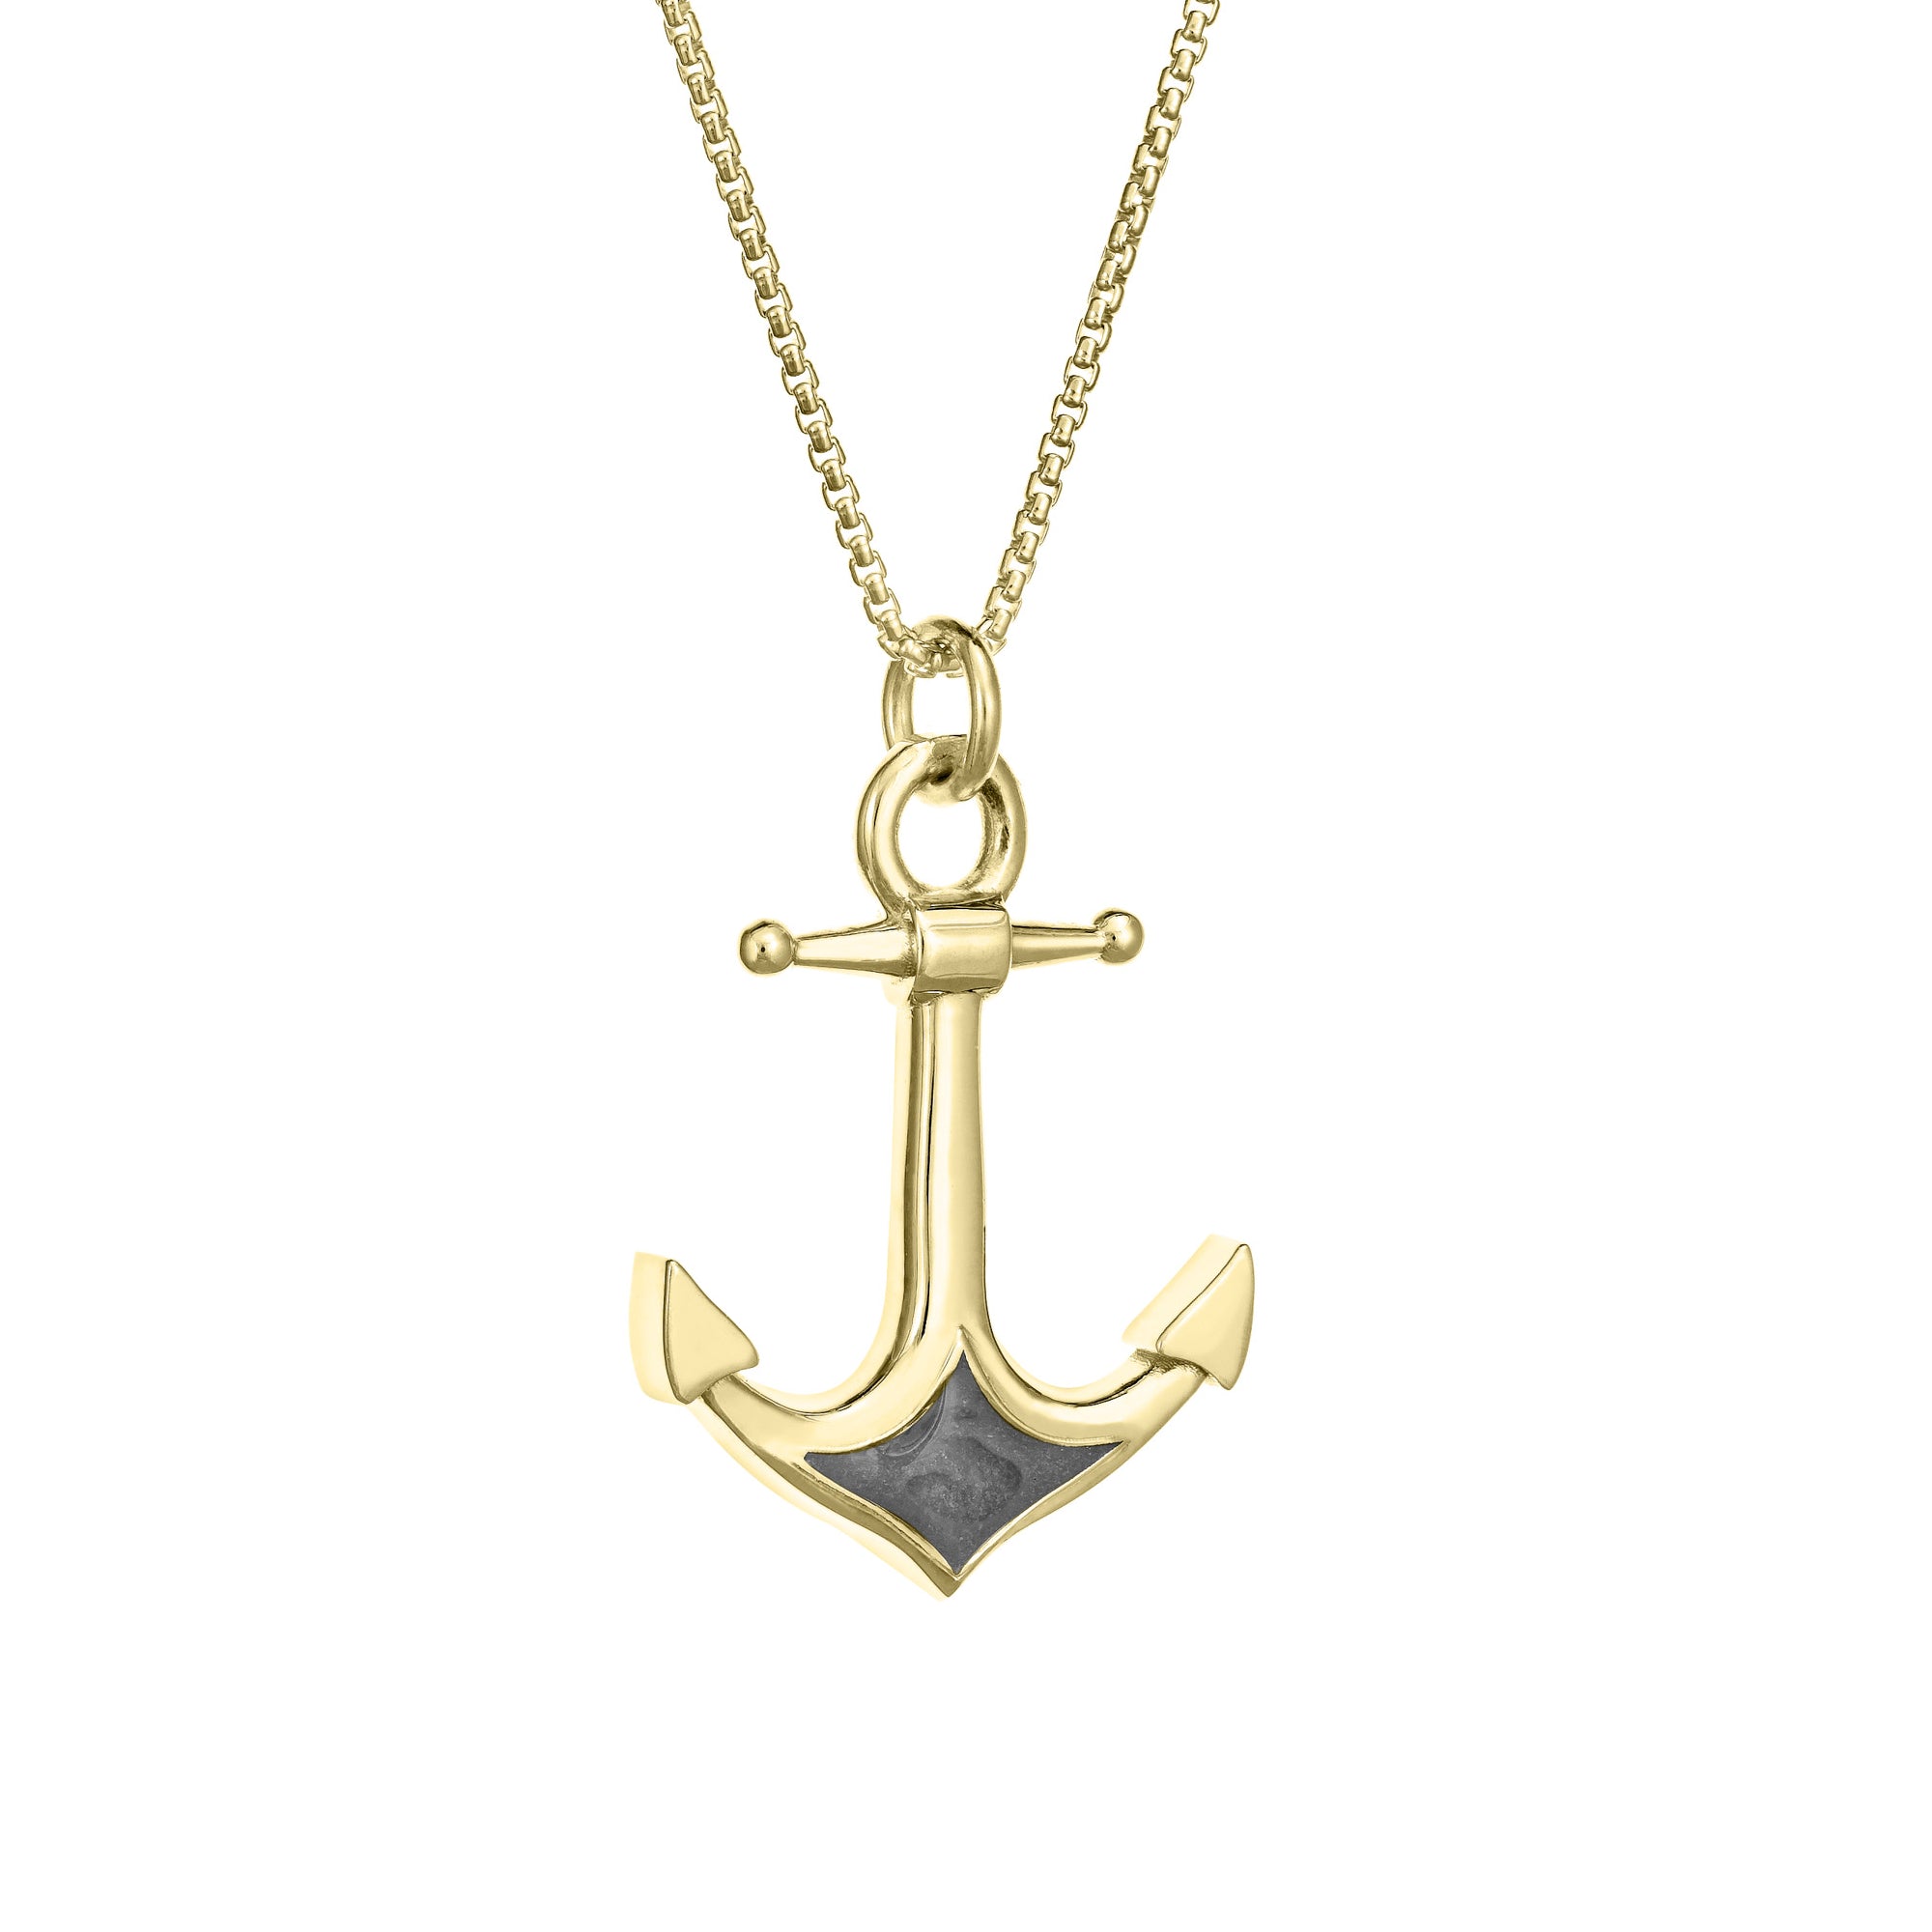 Men's Necklace Gold Plated Anchor Pendant Mens Jewelry Anchor Jewelry  Sailor Jewelry Nautical Jewelry Gift for Him - Etsy | Men's necklace gold,  Gold chains for men, Anchor jewelry